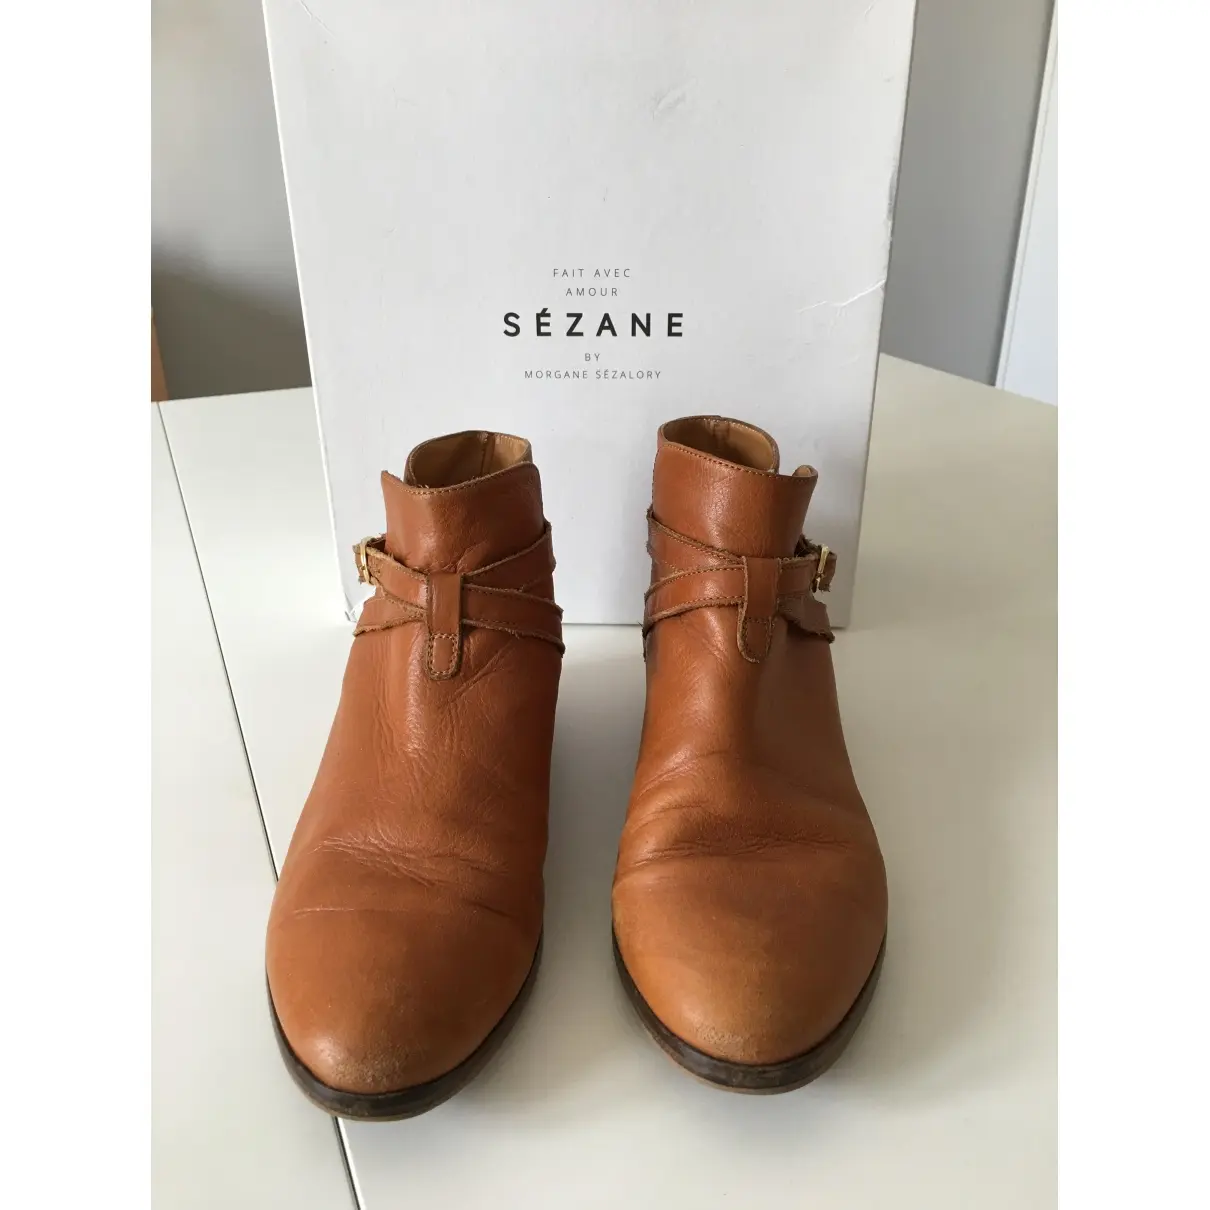 Sézane Leather buckled boots for sale